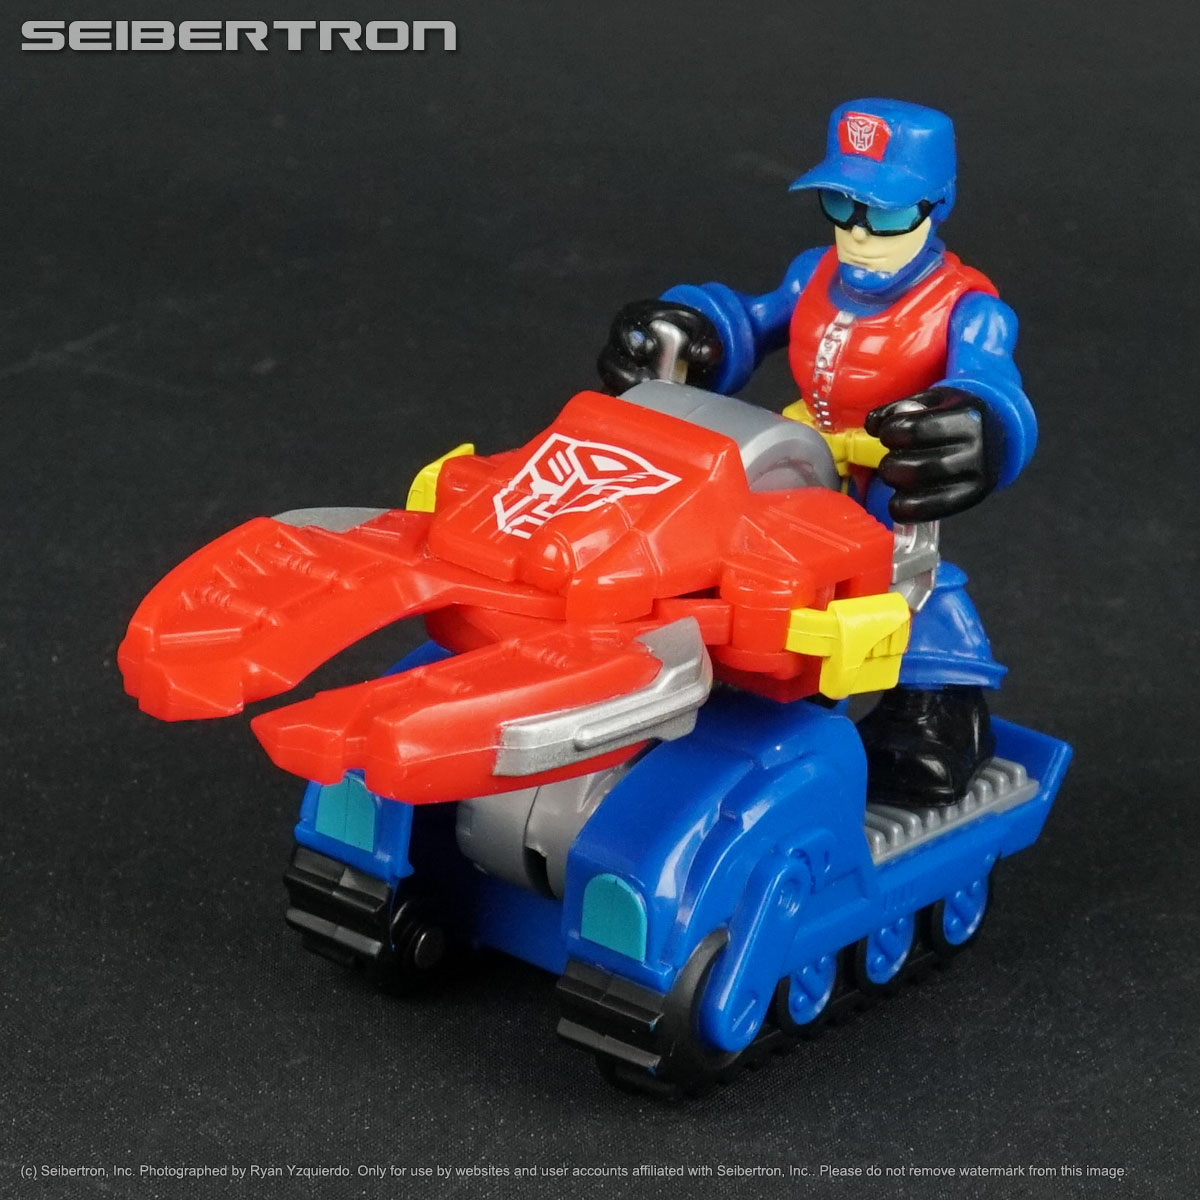 Transformers, Masters of the Universe, Teenage Mutant Ninja Turtles, Gobots, Comic Books, Shopkins, and other listings from Seibertron.com: CHIEF CHARLIE BURNS + RESCUE CUTTER Transformers Rescue Bots 2011 Playskool